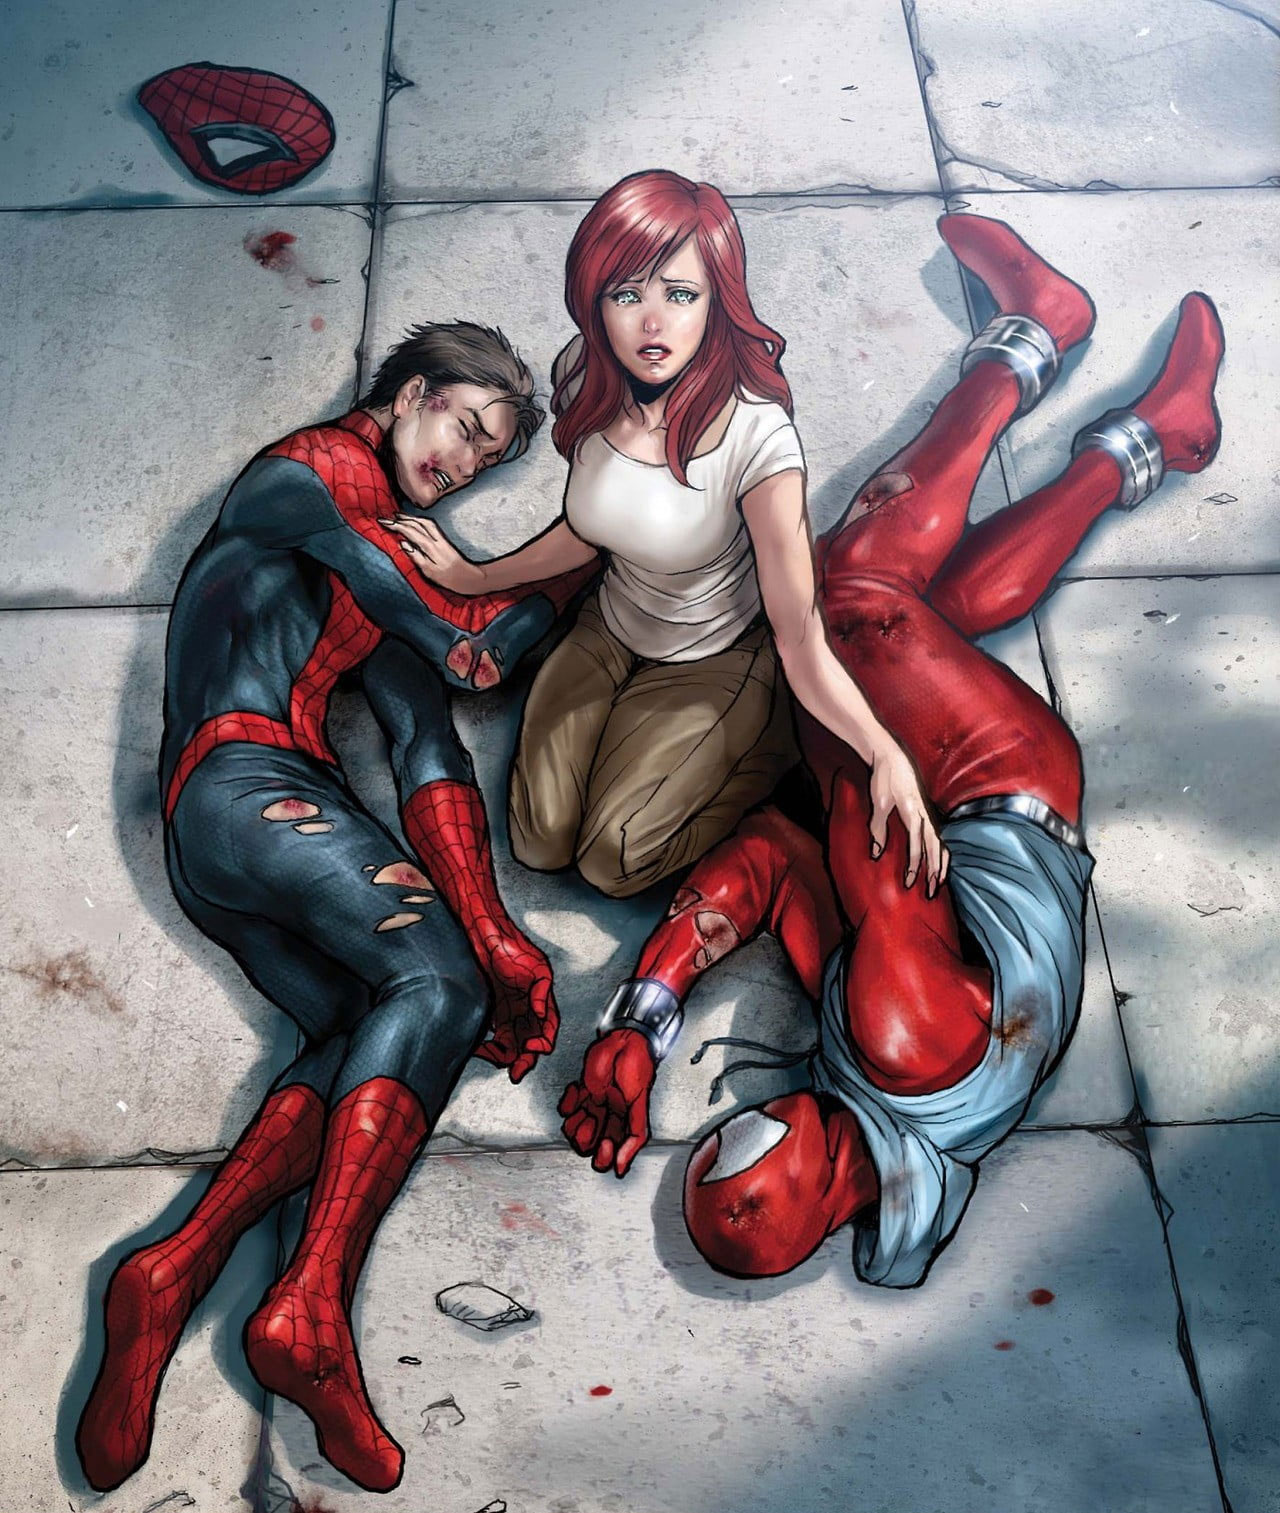 Wallpaper Jane, Spider Man, And Carnage Wallpaper, Mary Jane